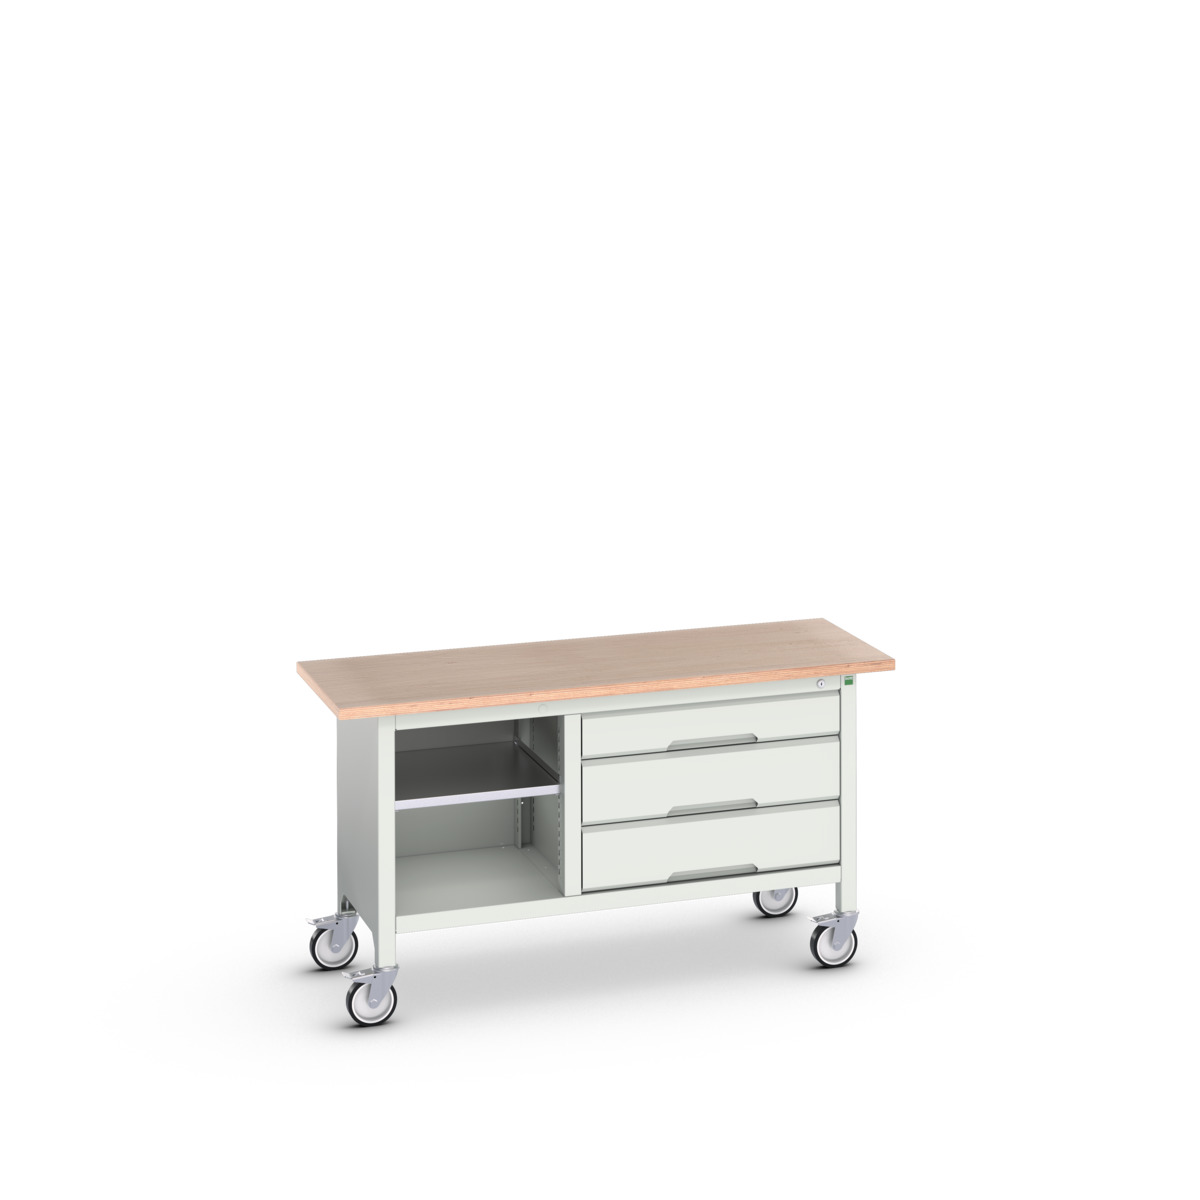 16923213.16 - verso mobile storage bench (mpx)